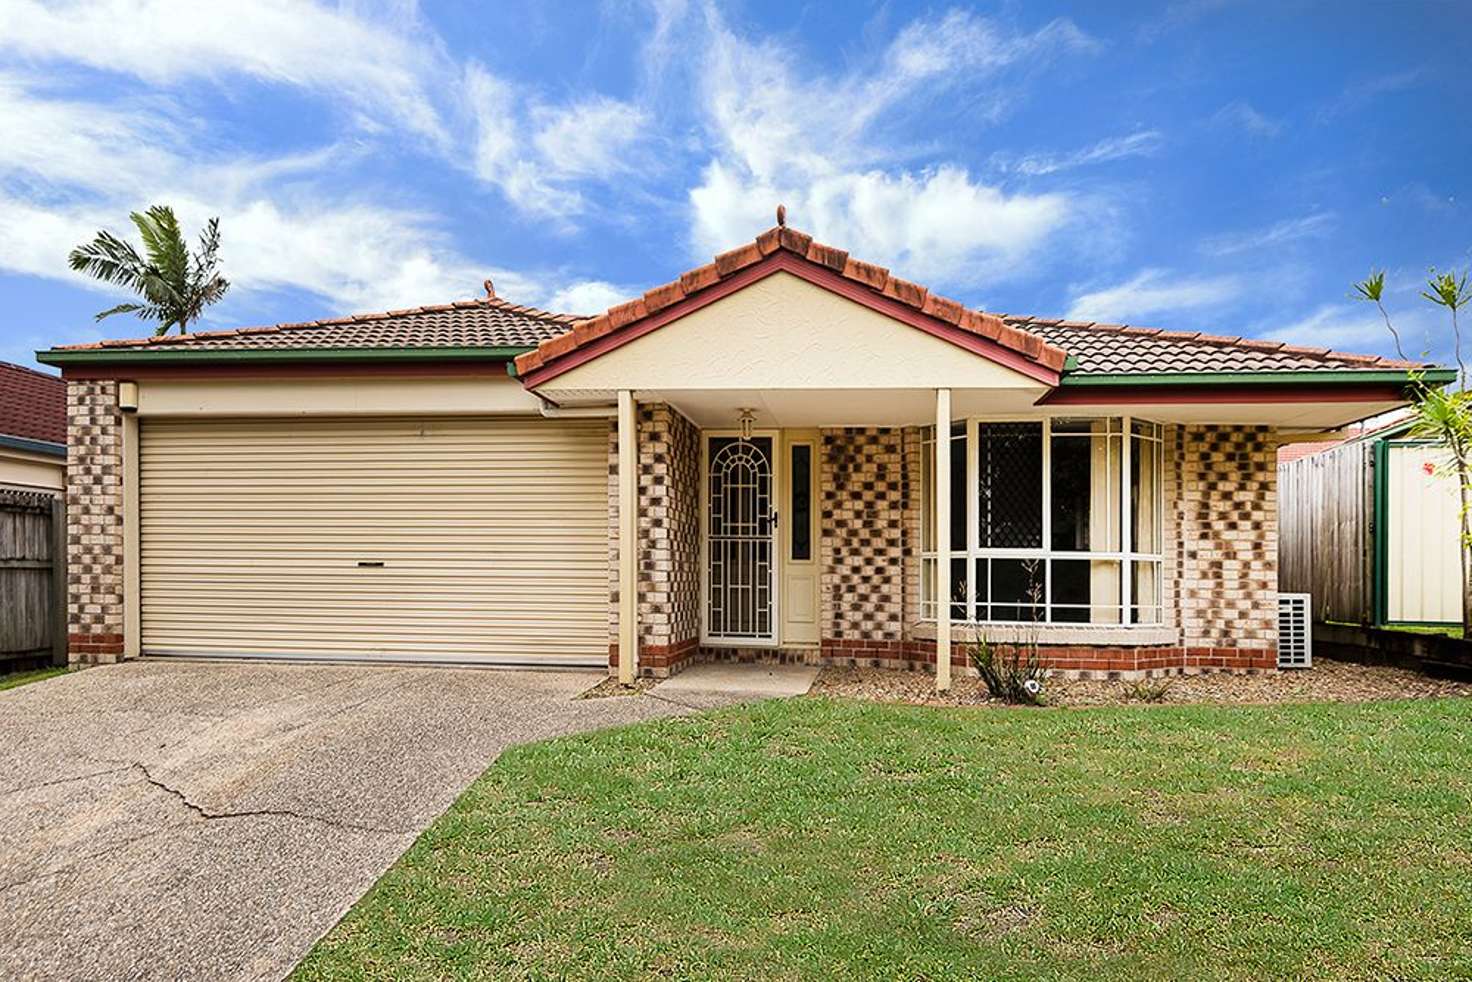 Main view of Homely house listing, 25 Isle of ely, Heritage Park QLD 4118